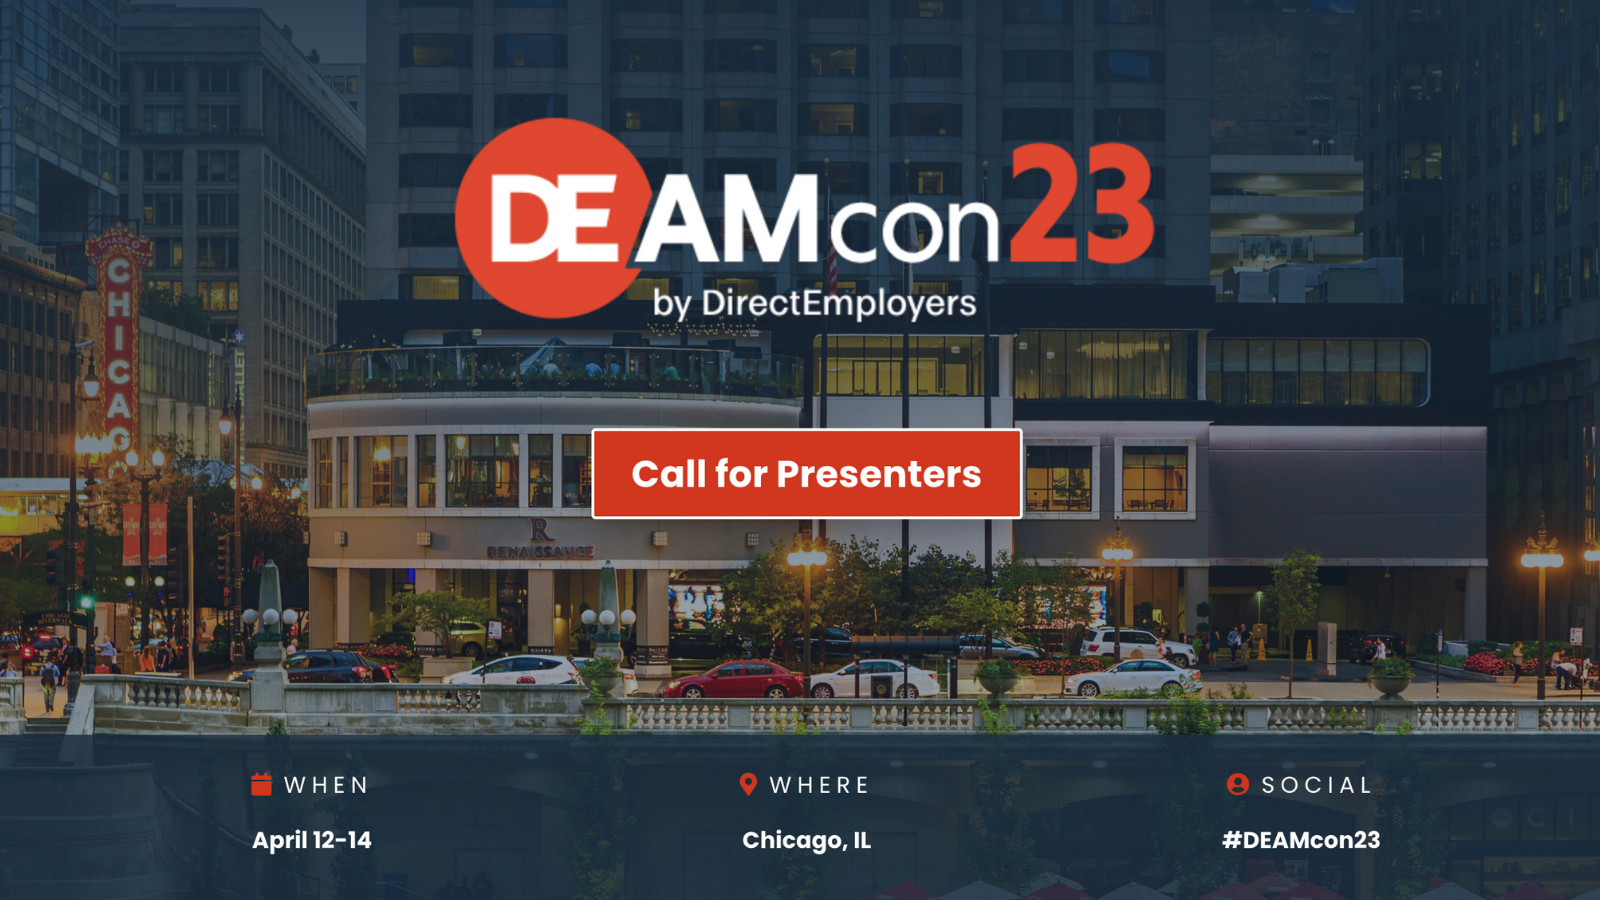 DEAMcon23 Call for Presenters - April 12-14 in Chicago